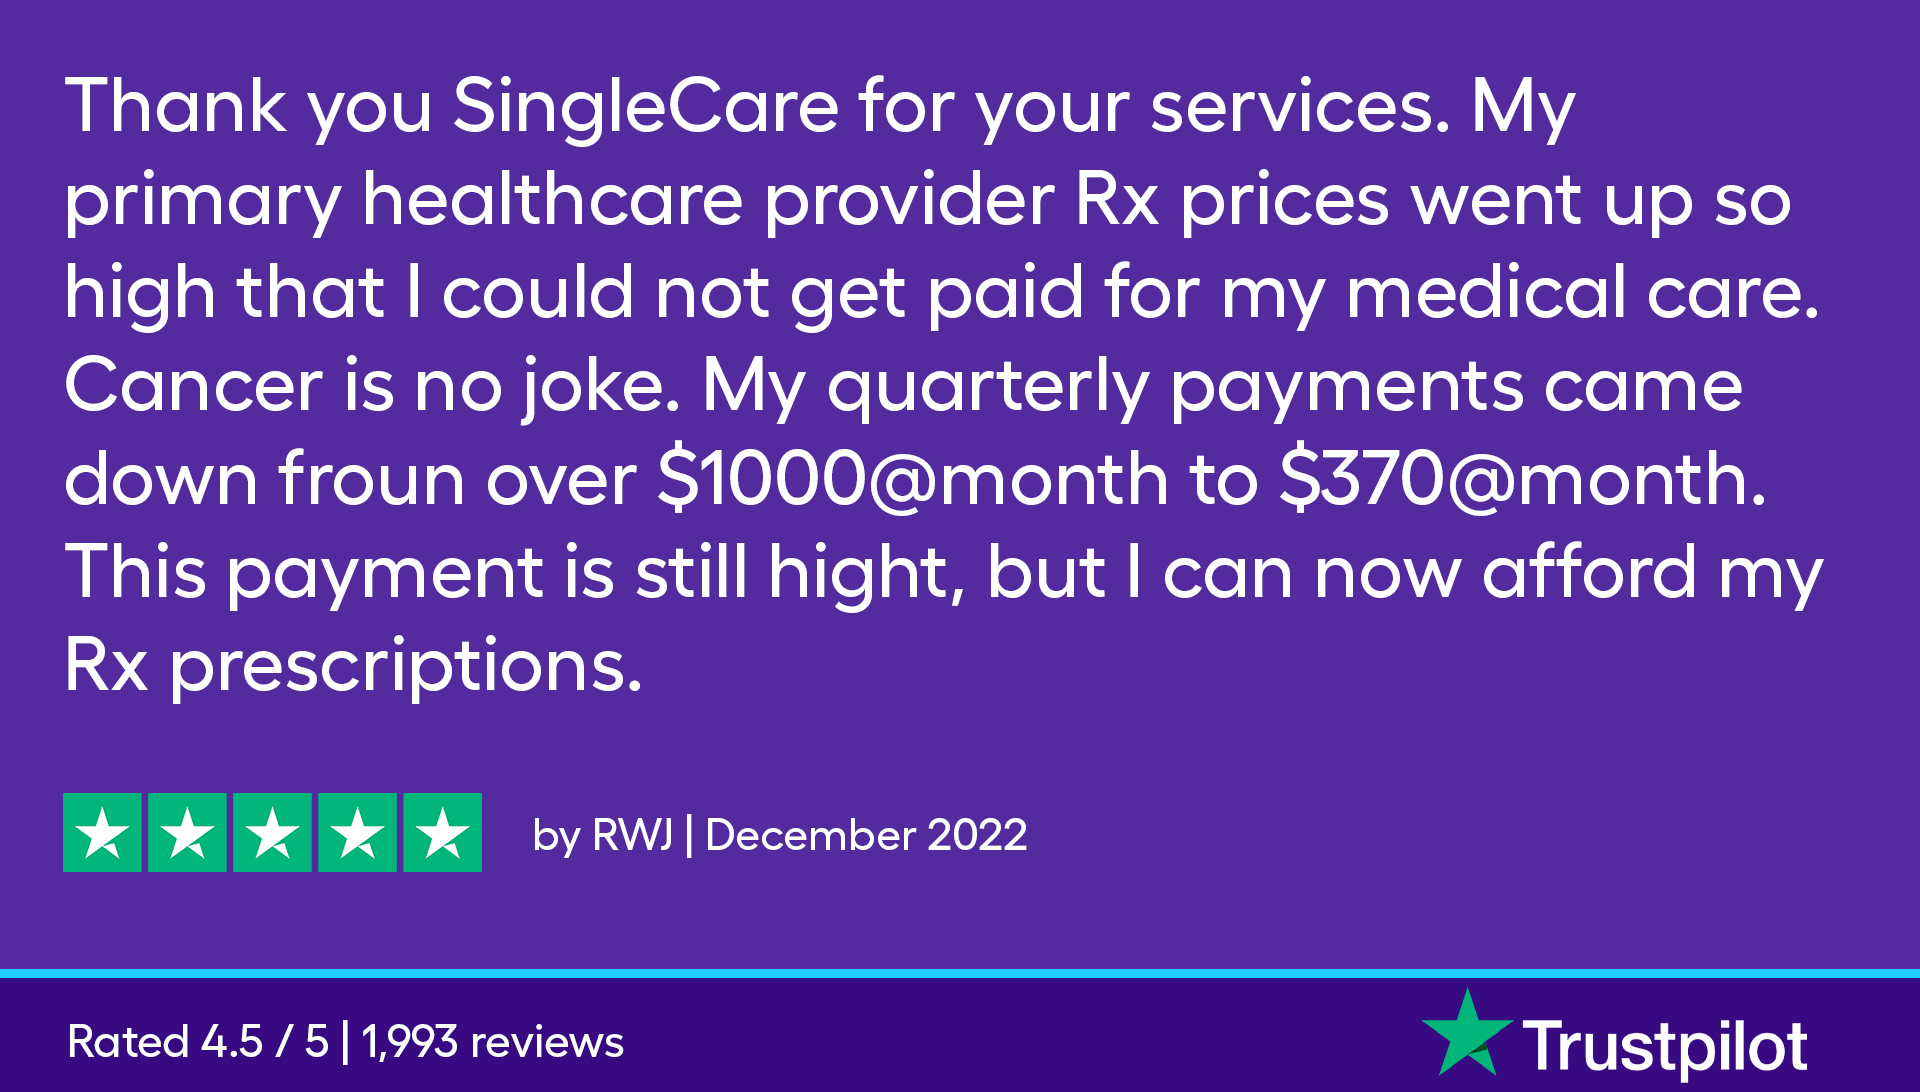 Thank you SingleCare for your services. My primary healthcare provider Rx prices went up so high that I could not get paid for my medical care. Cancer is no joke. My quarterly payments came down froun over $1000@month to $370@month. This payment is still hight, but I can now afford my Rx prescriptions.